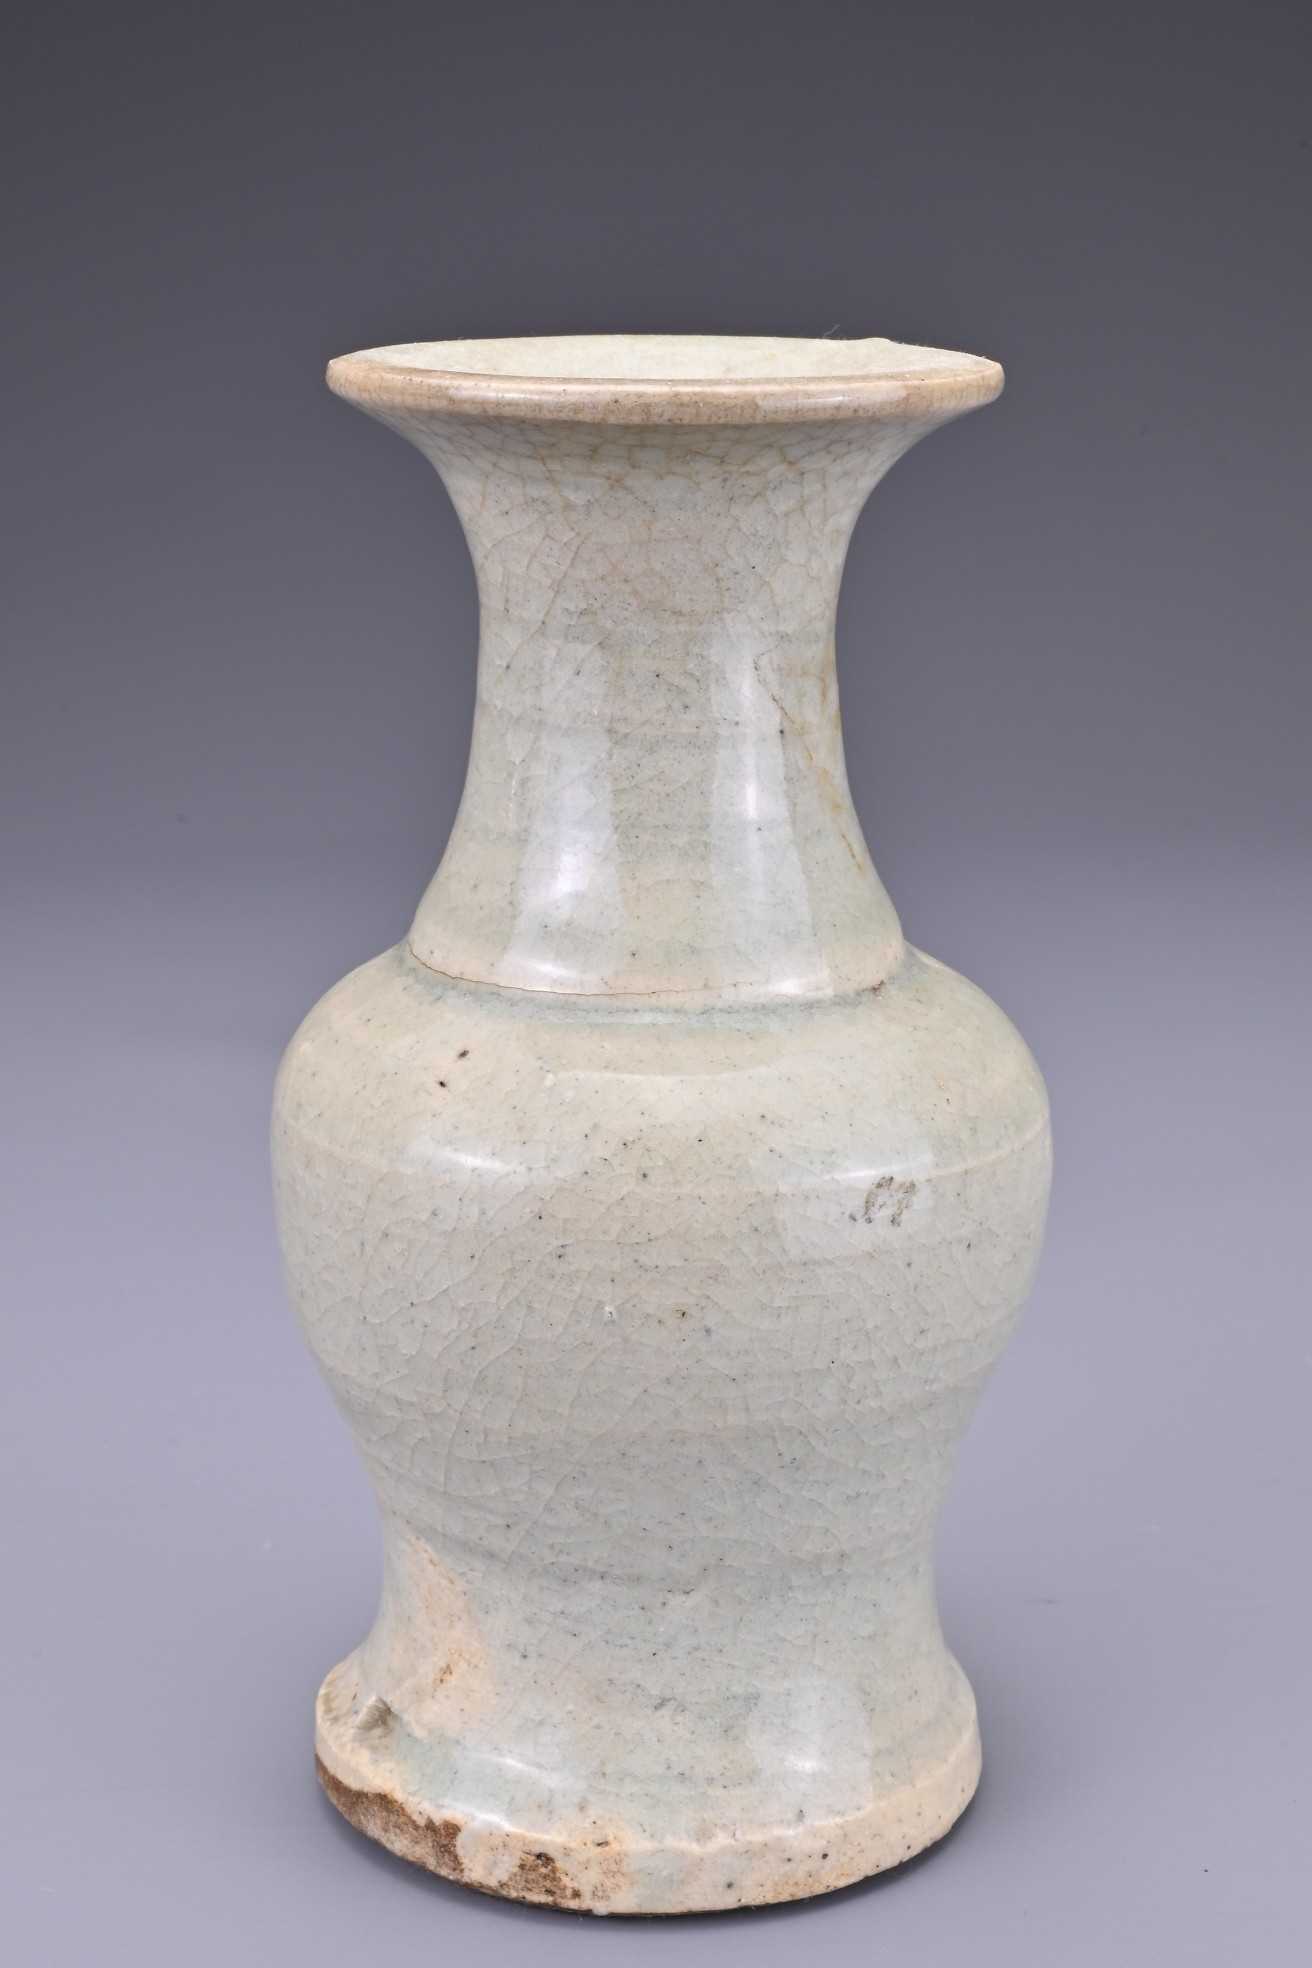 A CHINESE PALE CELADON VASE, LATE MING DYNASTY. Heavily potted with visible crackle throughout. 14. - Image 3 of 7